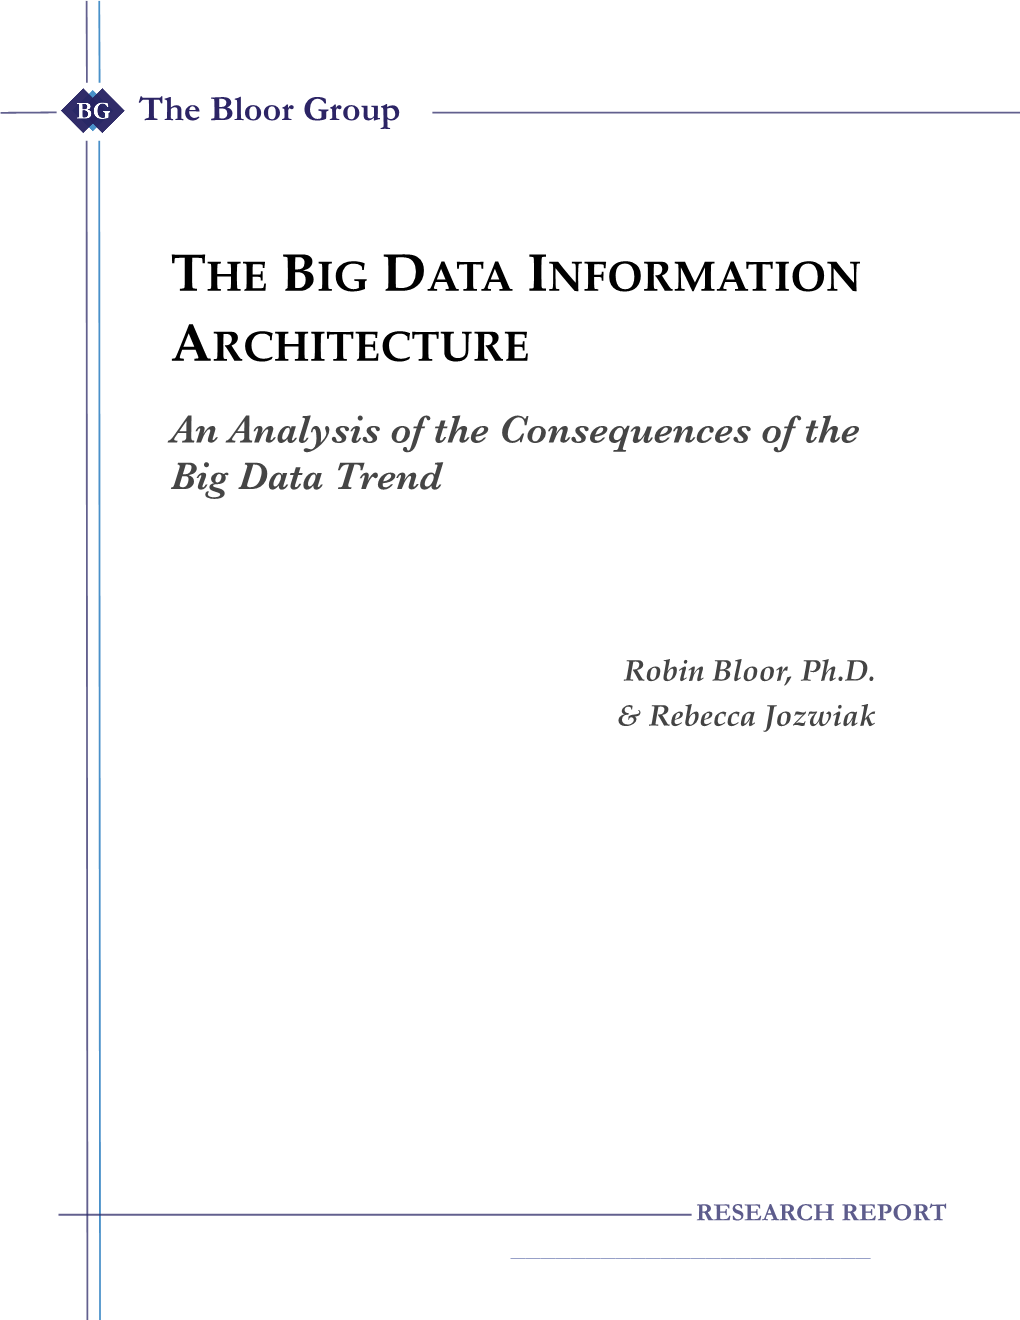 THE BIG DATA INFORMATION ARCHITECTURE! an Analysis of the Consequences of the Big Data Trend